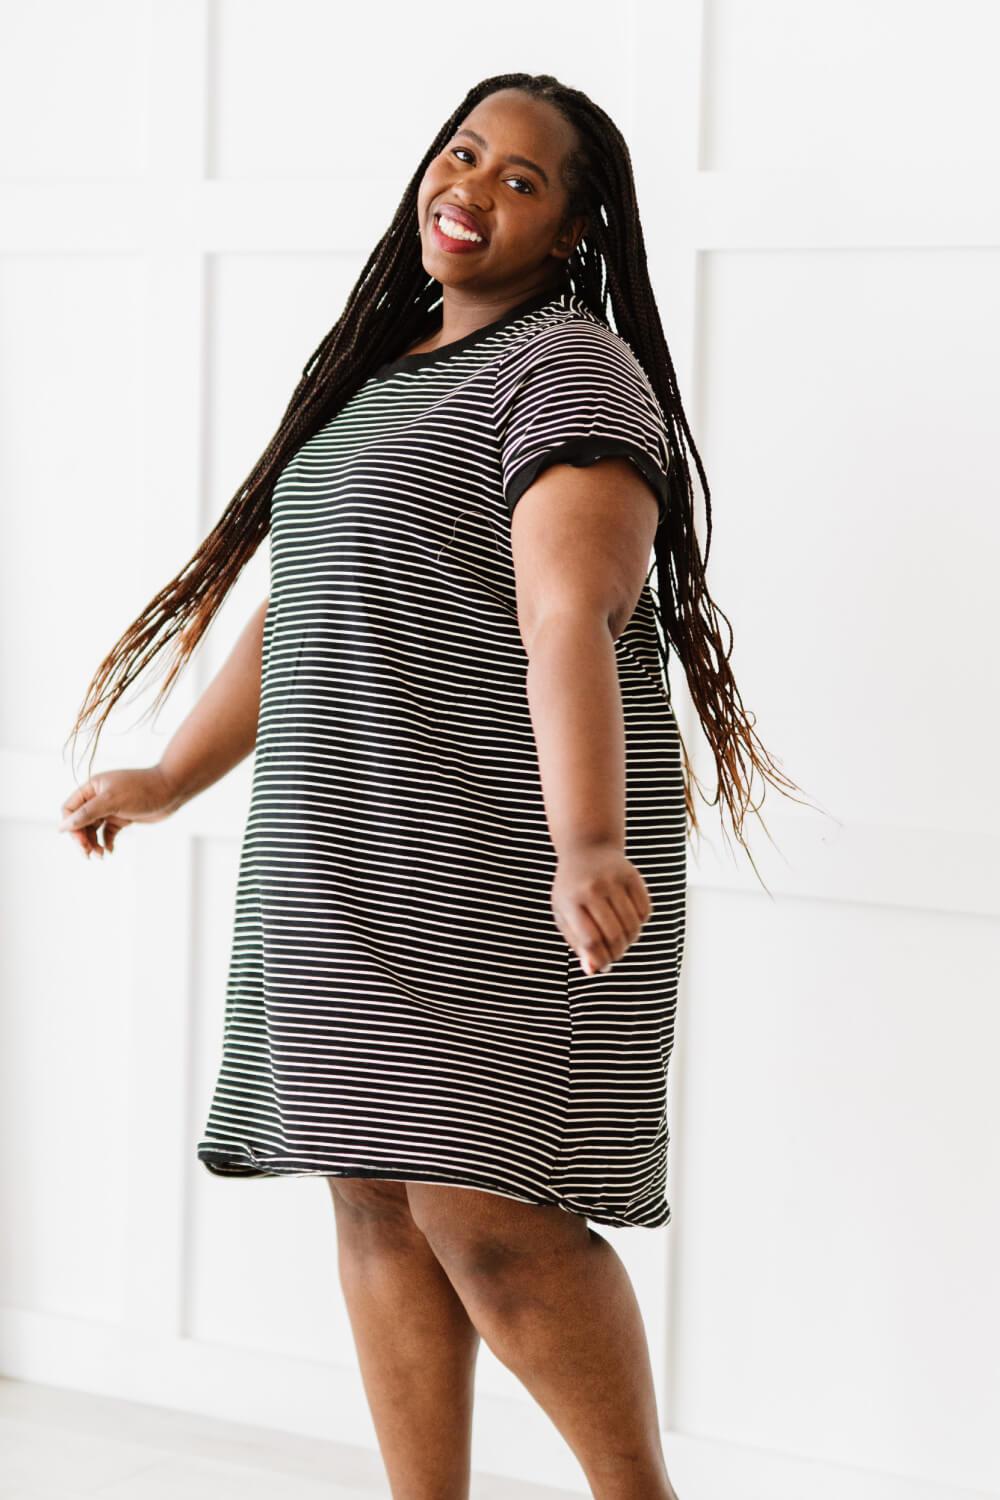 Cotton Bleu Simplicity is Best Full Size Striped T-Shirt Dress in Black BLUE ZONE PLANET